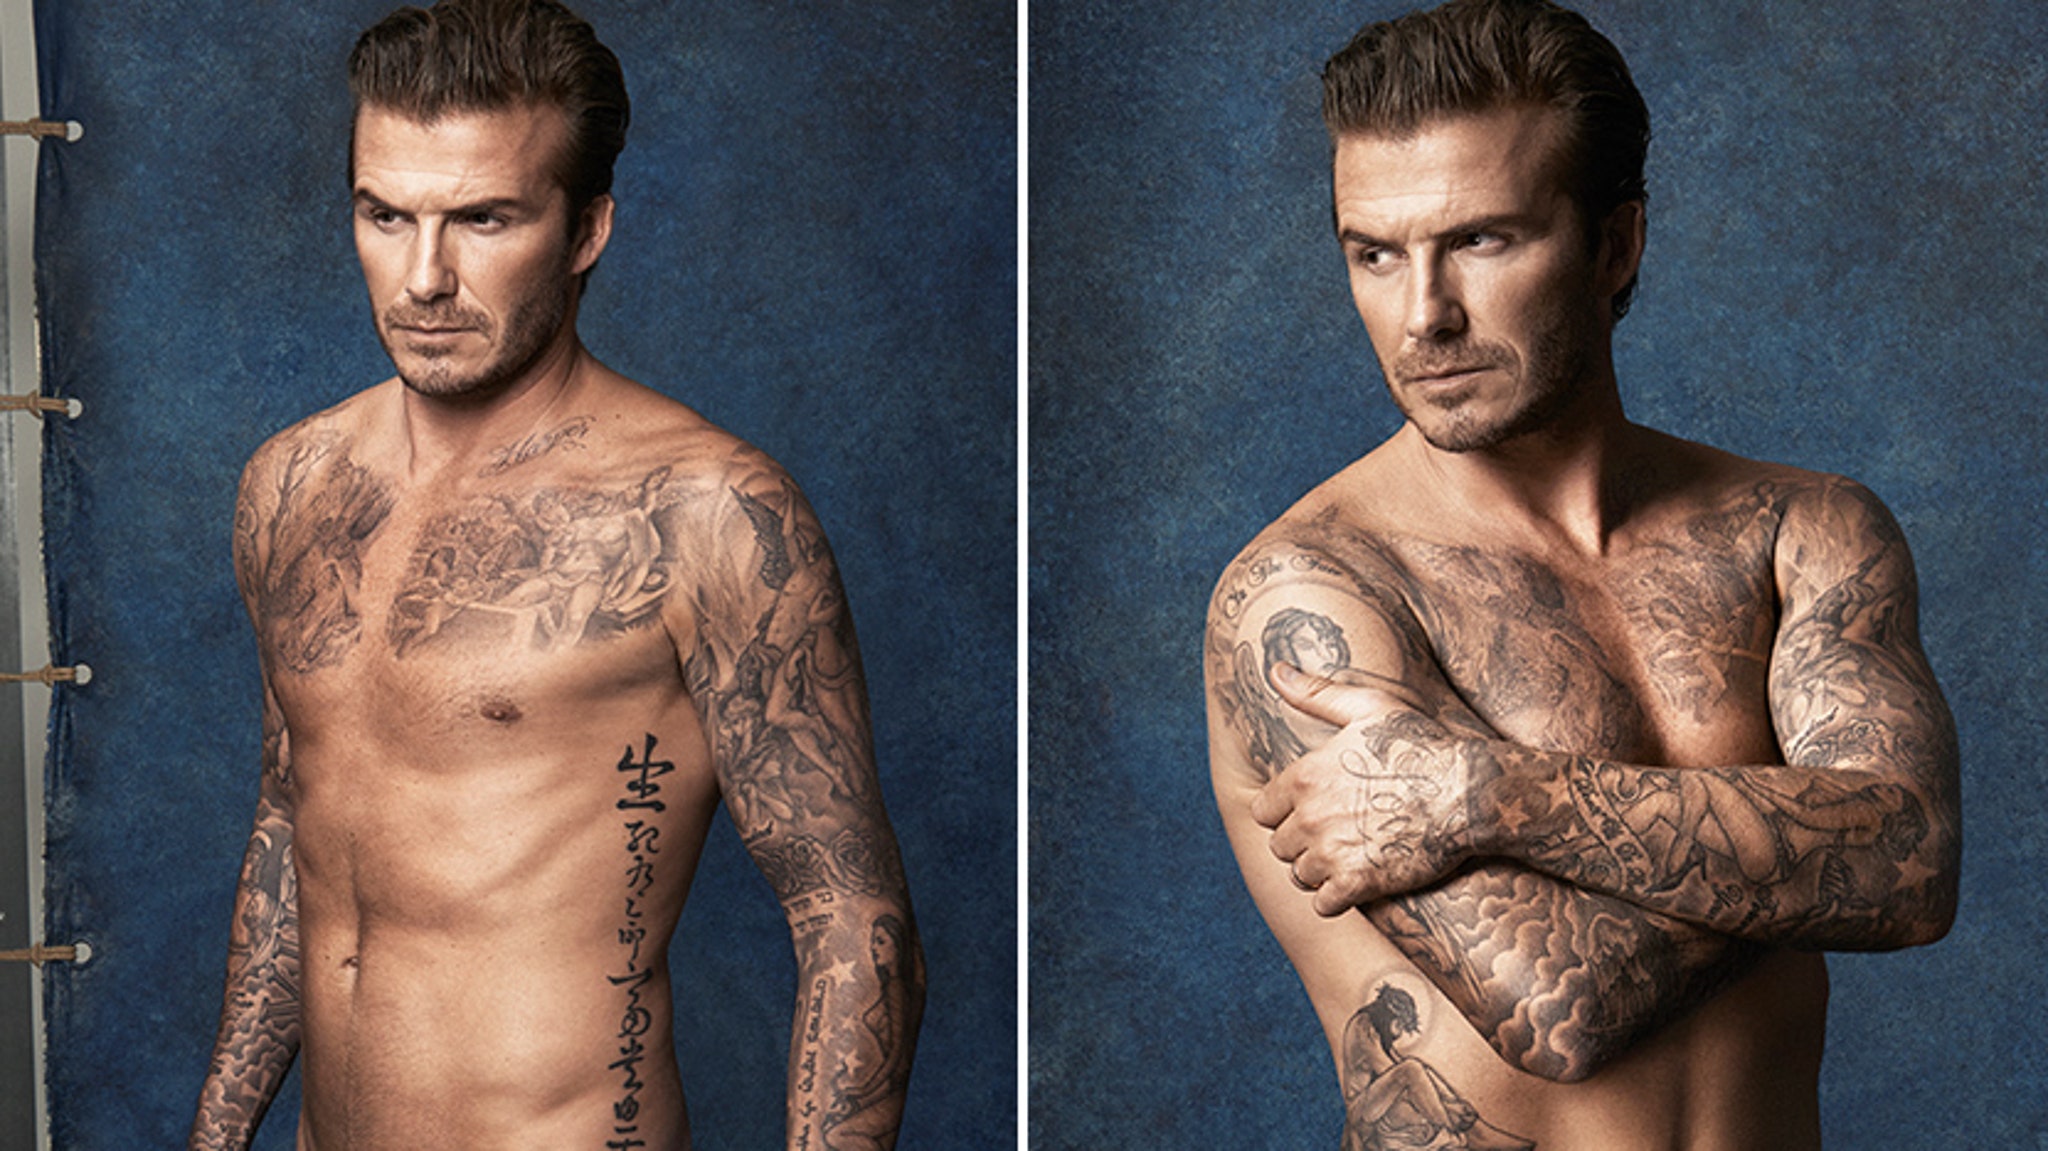 David Beckham flashes pants & tatts for new H&M ad | Daily Star